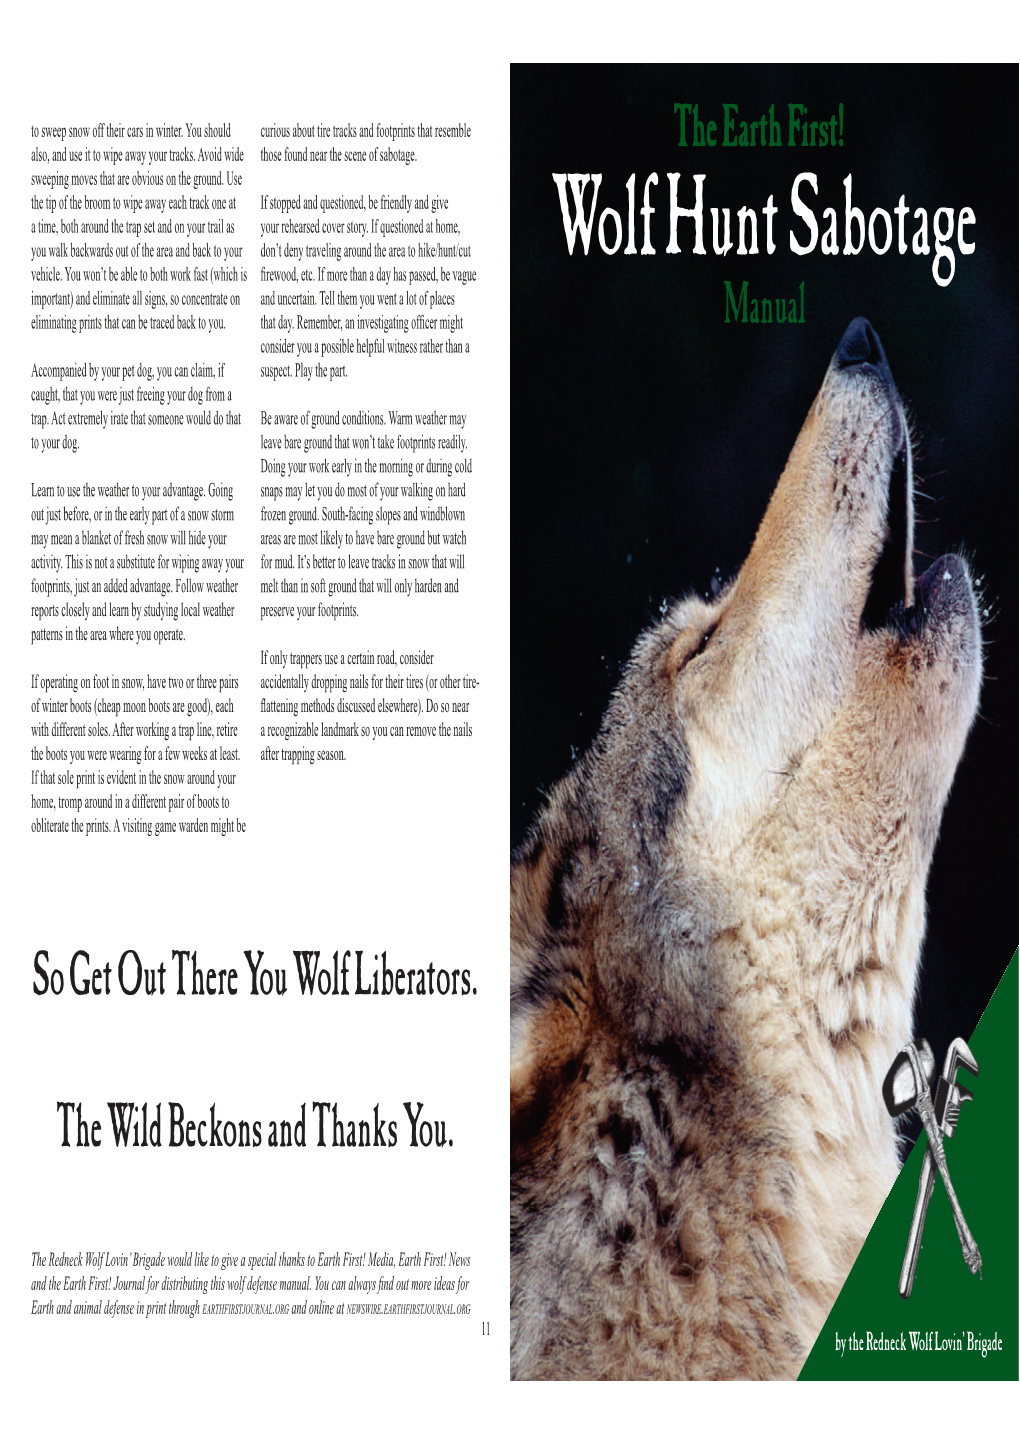 The Earth First! Wolf Hunt Sabotage Manual